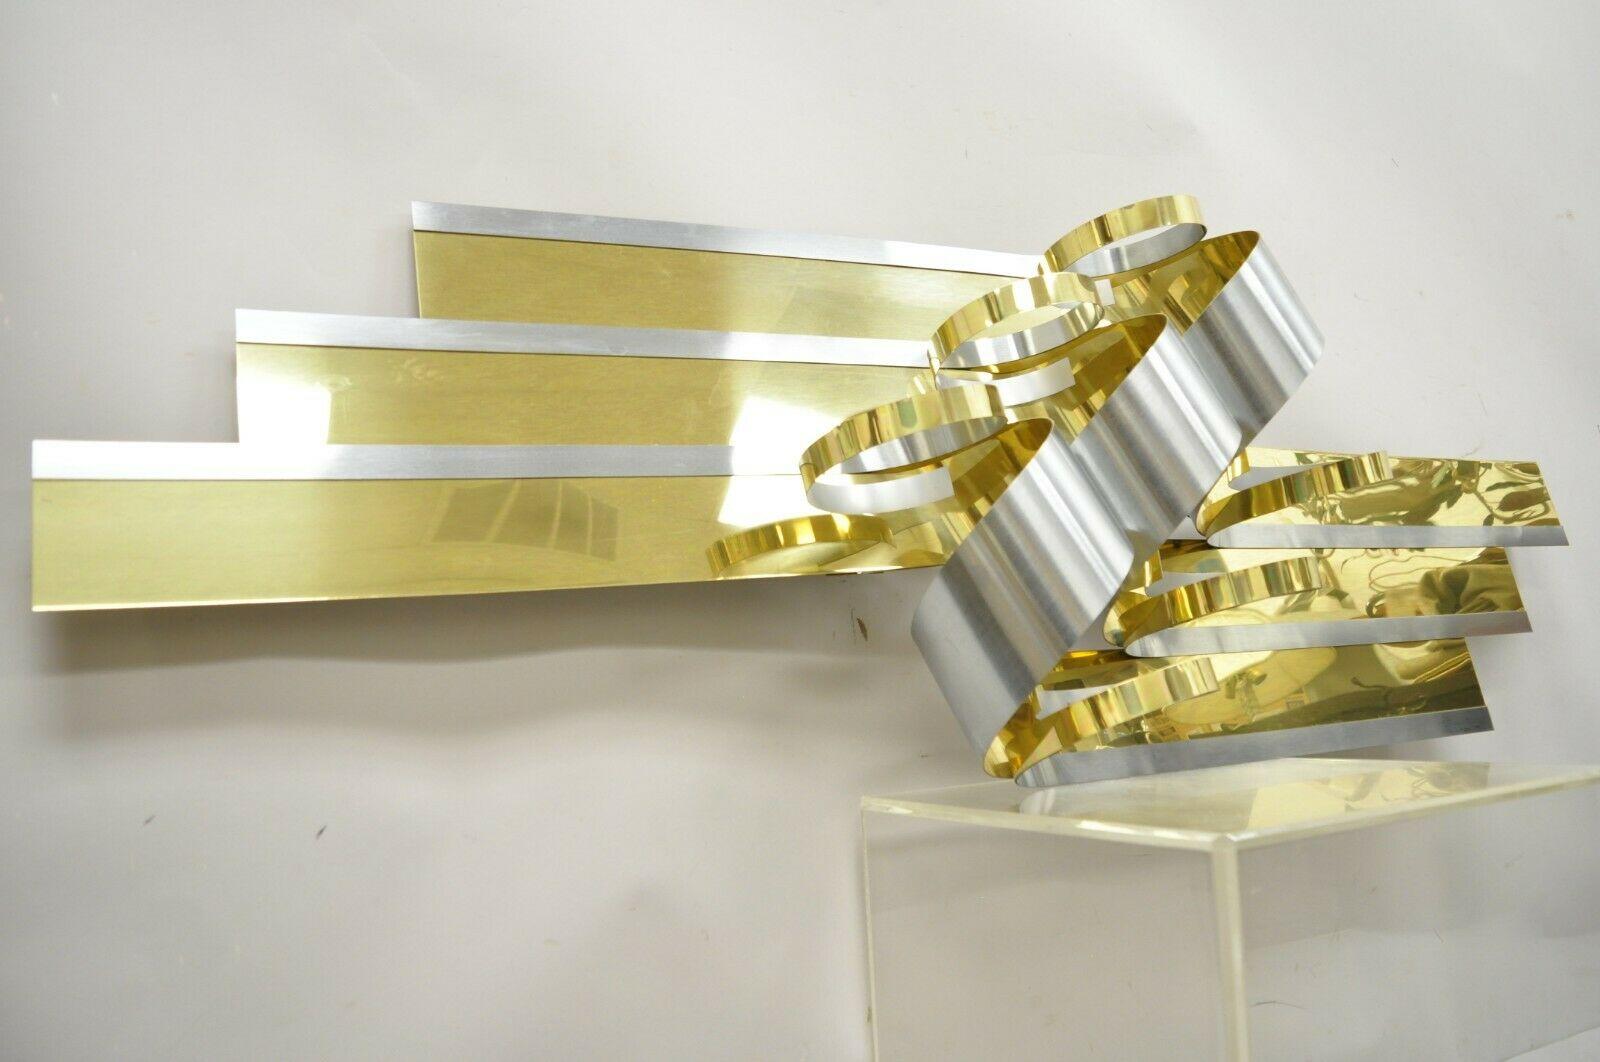 Vintage Curtis Jere 1989 brass ribbons 100682 large wall art sculpture. Item features original paper work, brass and steel construction, larger impressive size, signed to corner, very nice vintage item, quality American craftsmanship, great style